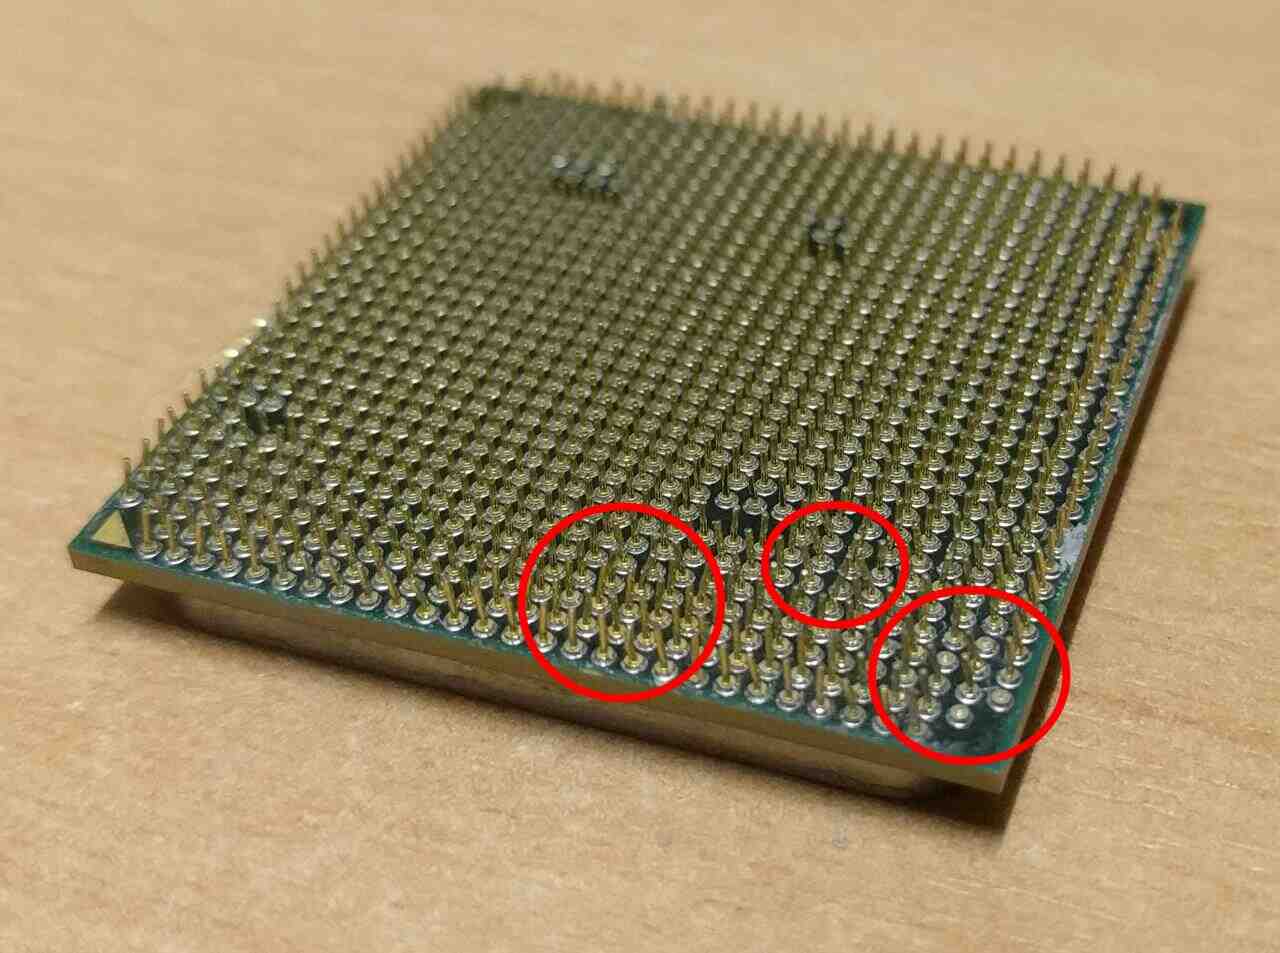 How to What is a dead CPU?